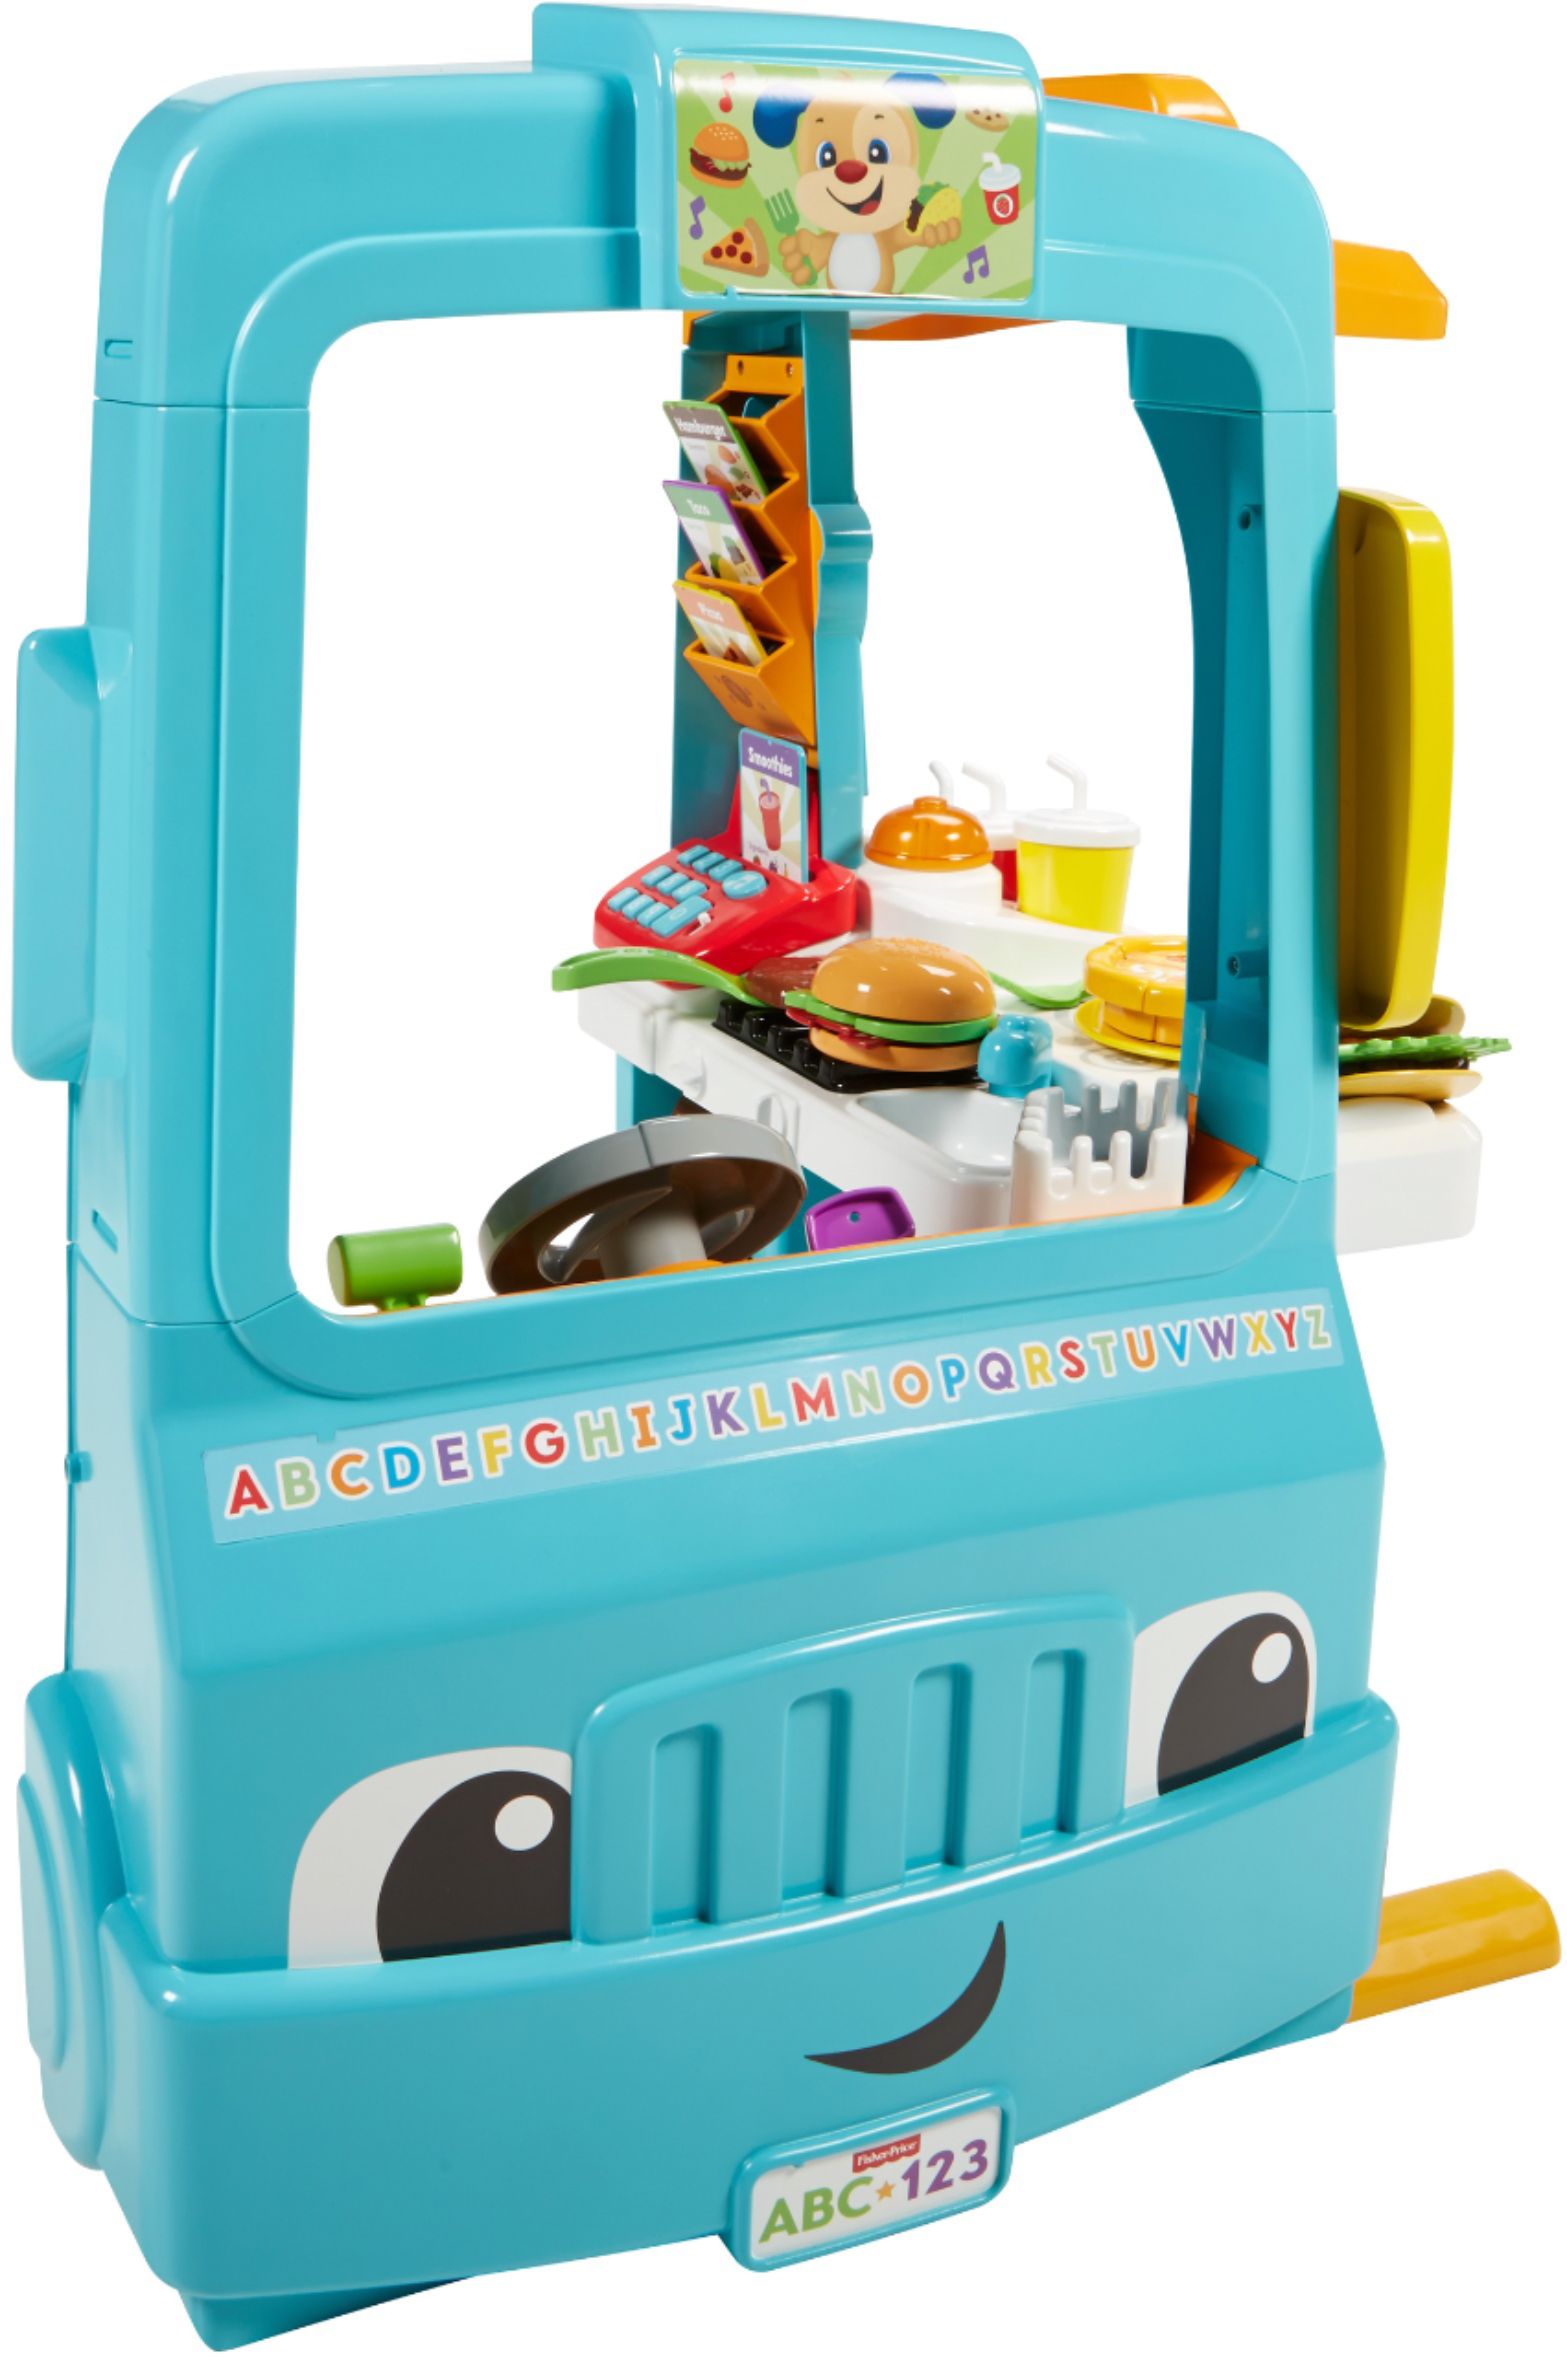 fisher price laugh and learn serve it up food truck